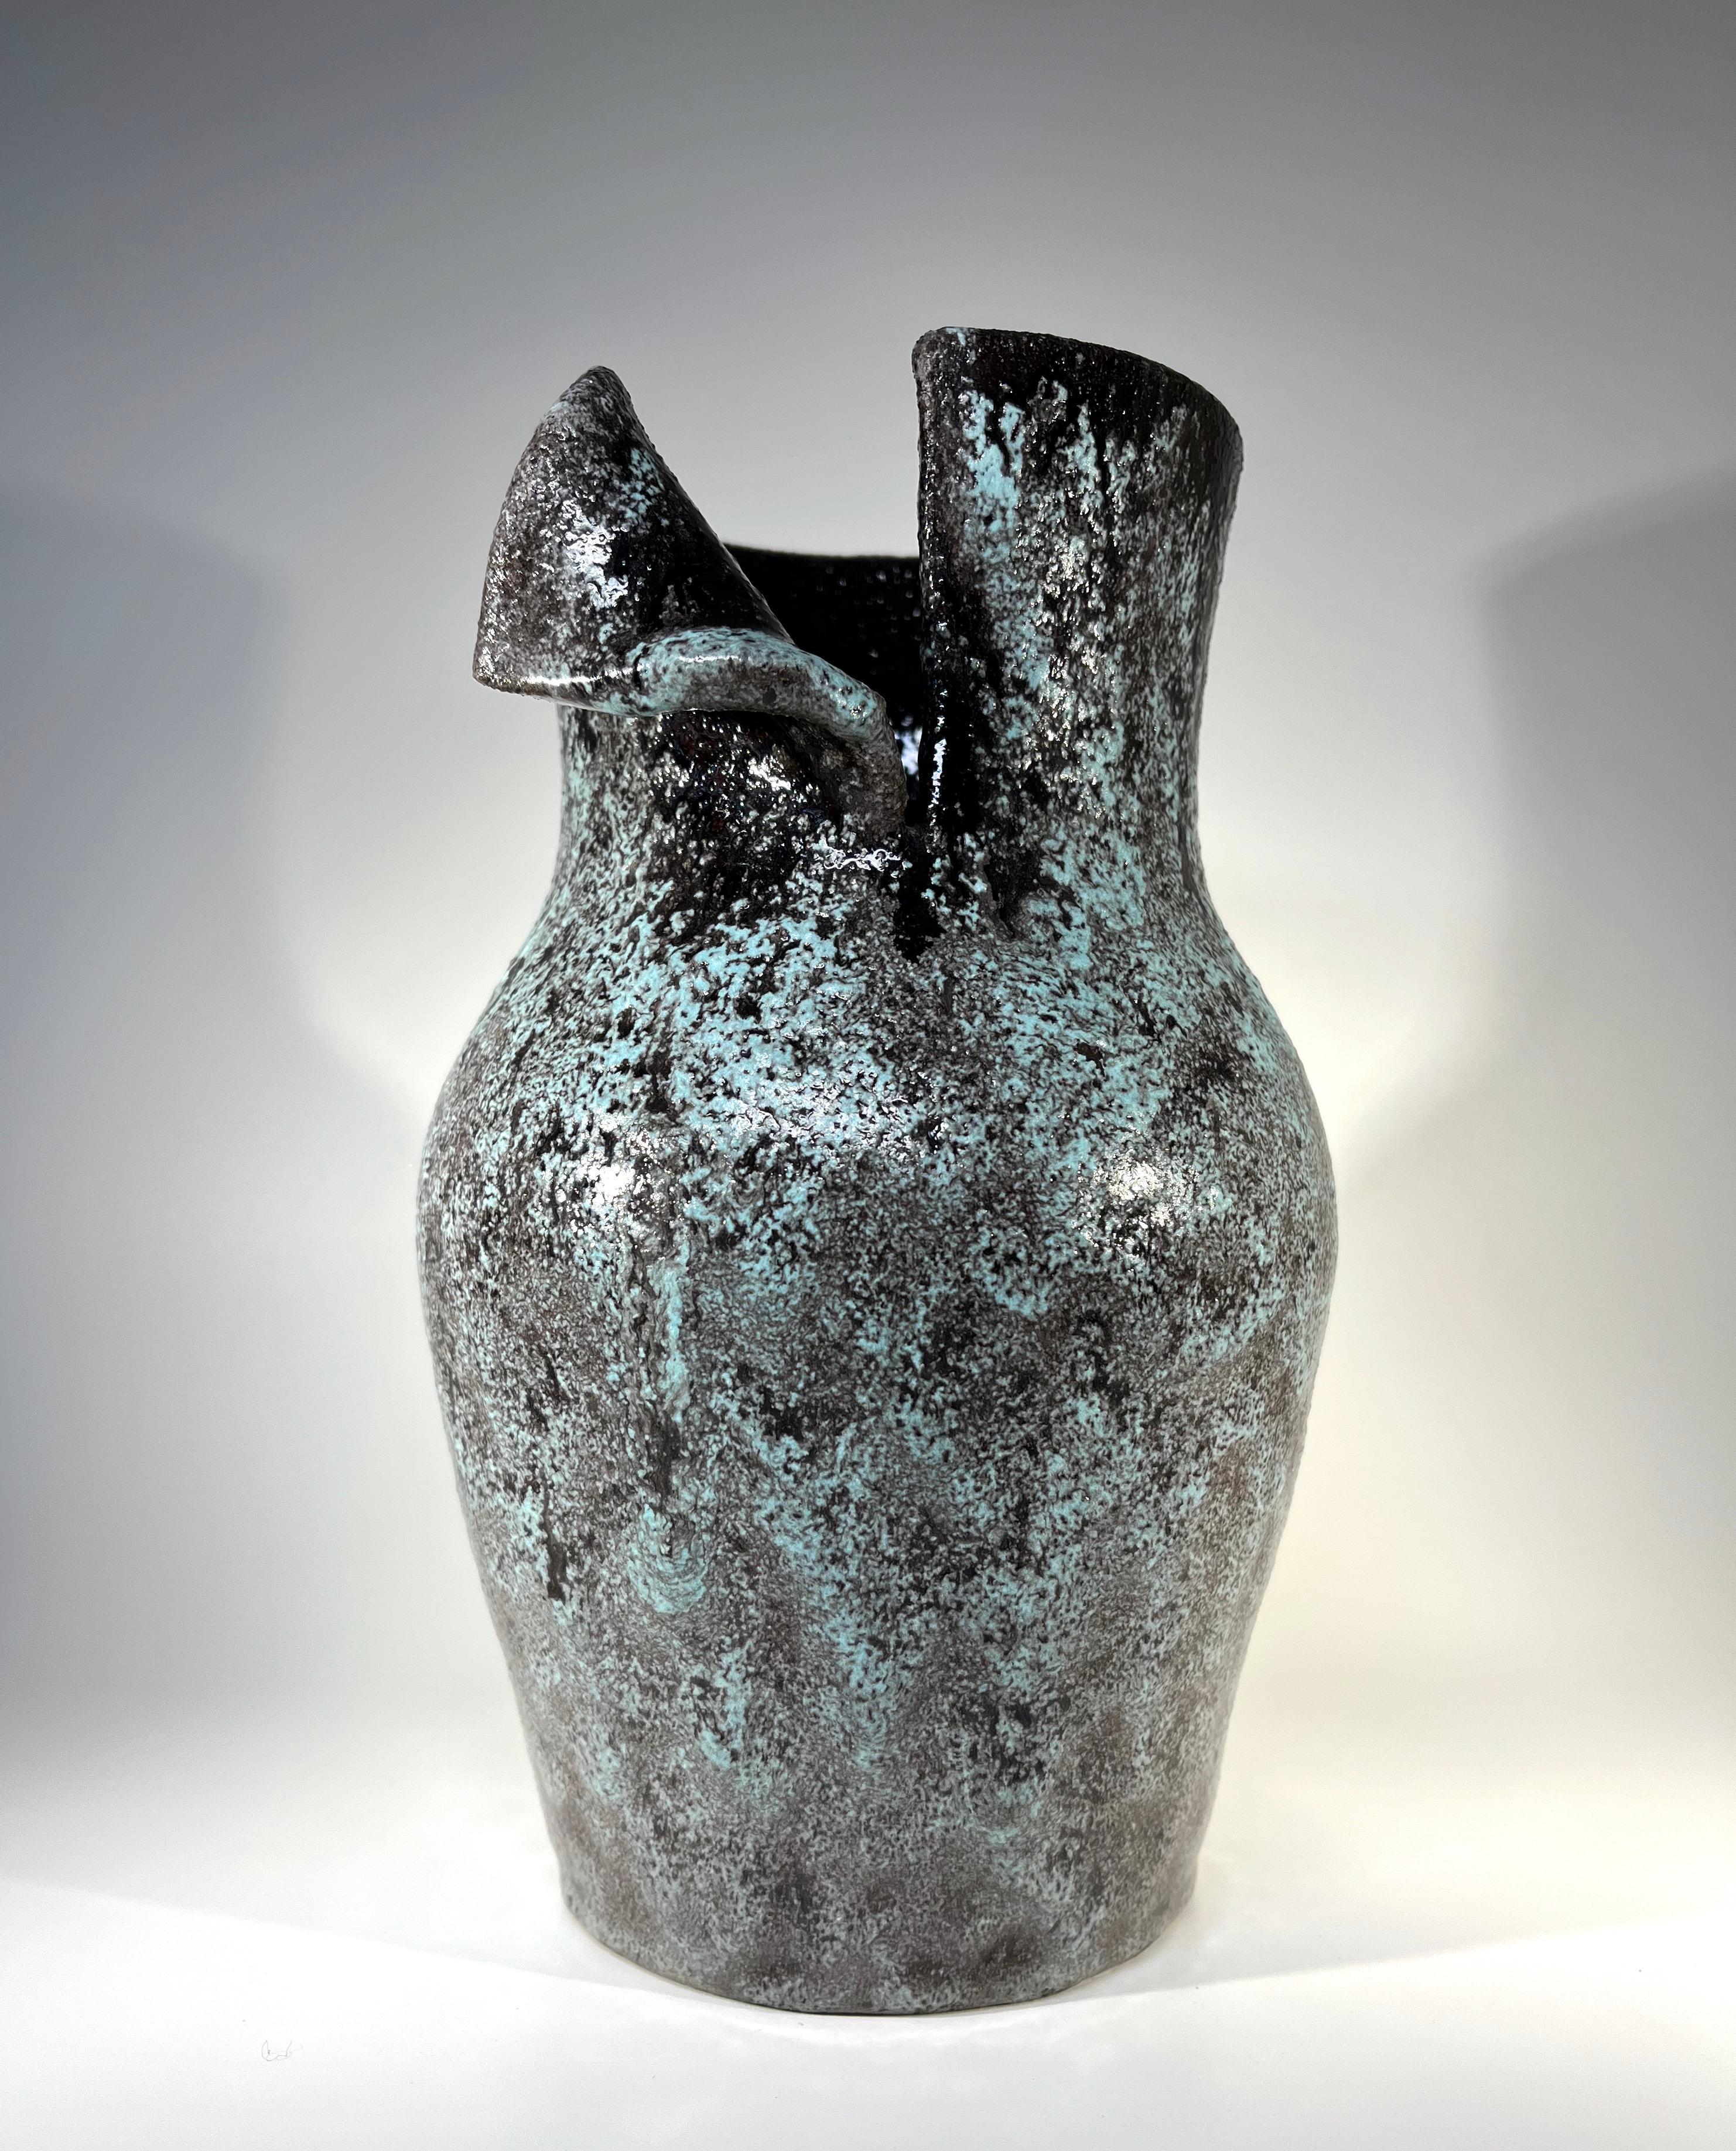 Brutalist in form, coupled with an impressive glaze of pale blue and charcoal, this is a powerful statement vase commanding presence
Phenomenal and tactile piece by Accolay, France
Circa 1960's
Signed Accolay to base
Height 9 inch, Diameter 6